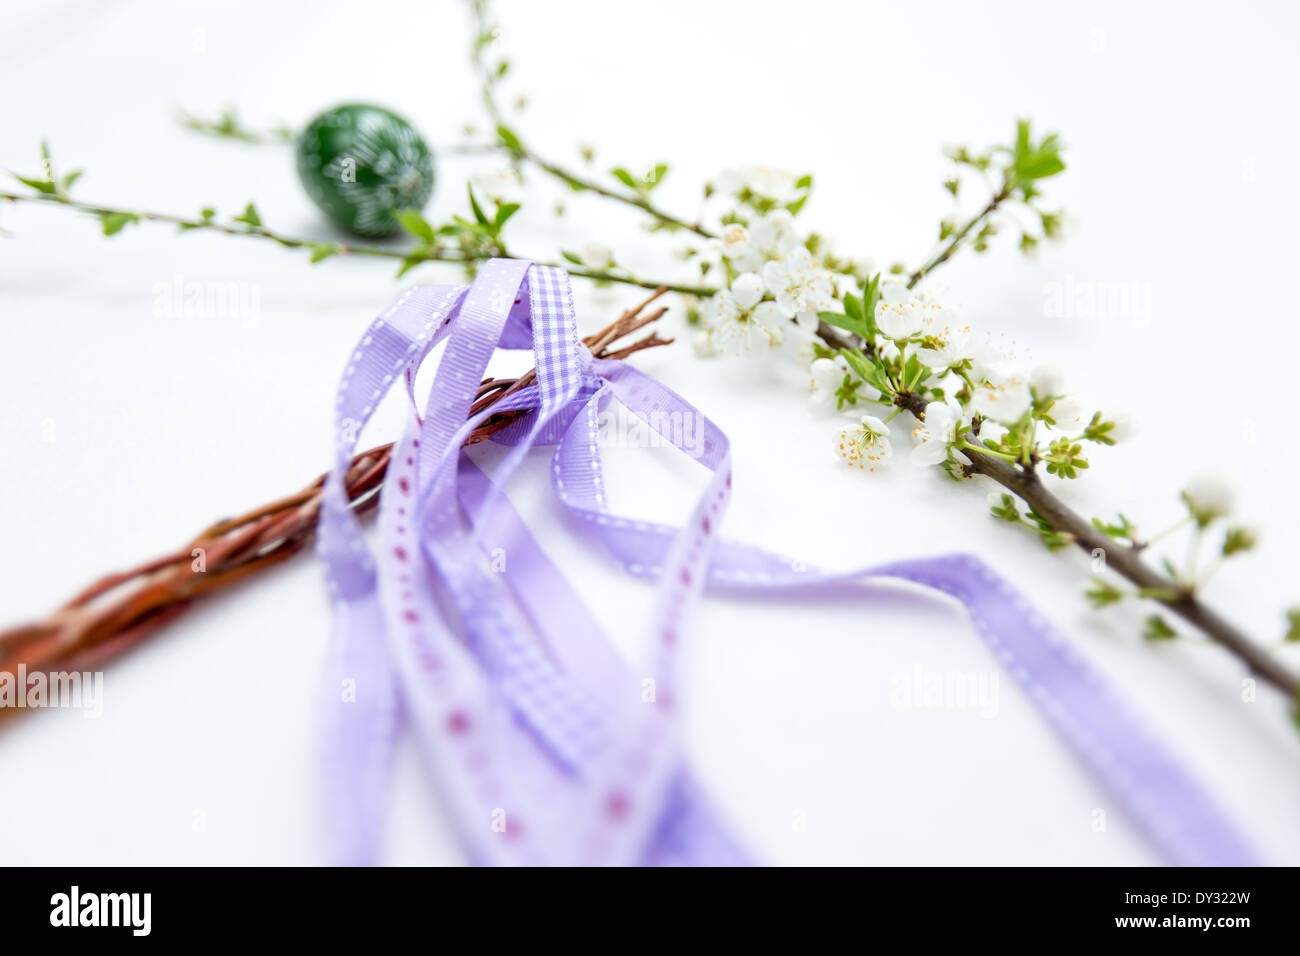 Easter holiday and decoration, czech tradition Stock Photo